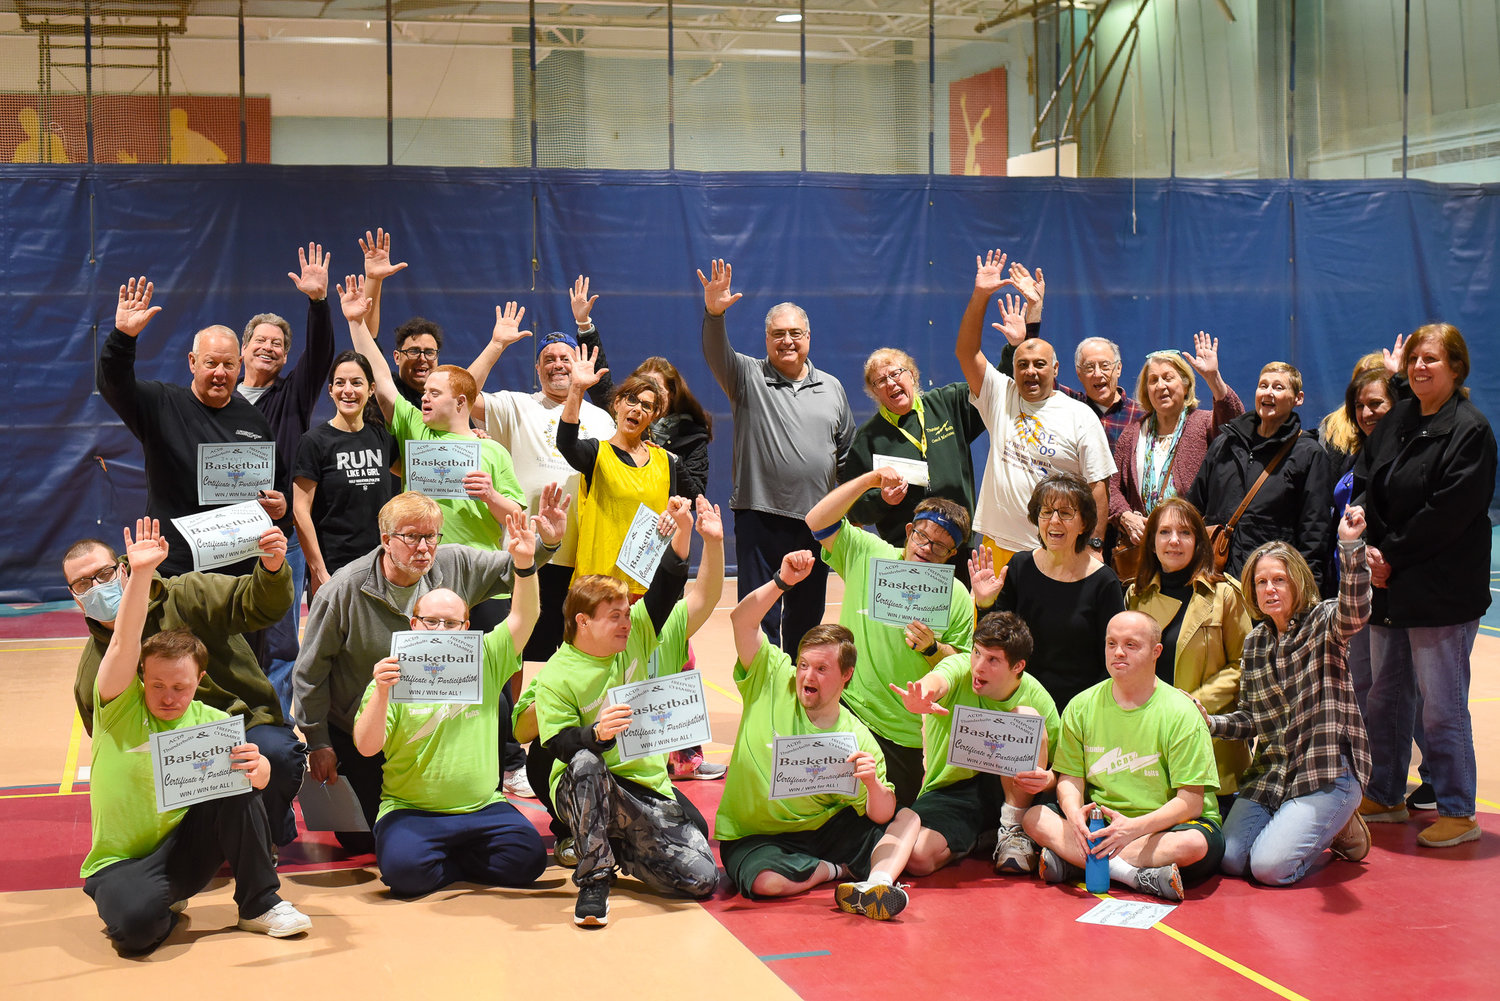 In a heartwarming game of basketball to celebrate and promote inclusion of those of all abilities, the ACDS Thunderbolts, a Special Olympics team, took on the Freeport Chamber of Commerce and the mayor’s office.